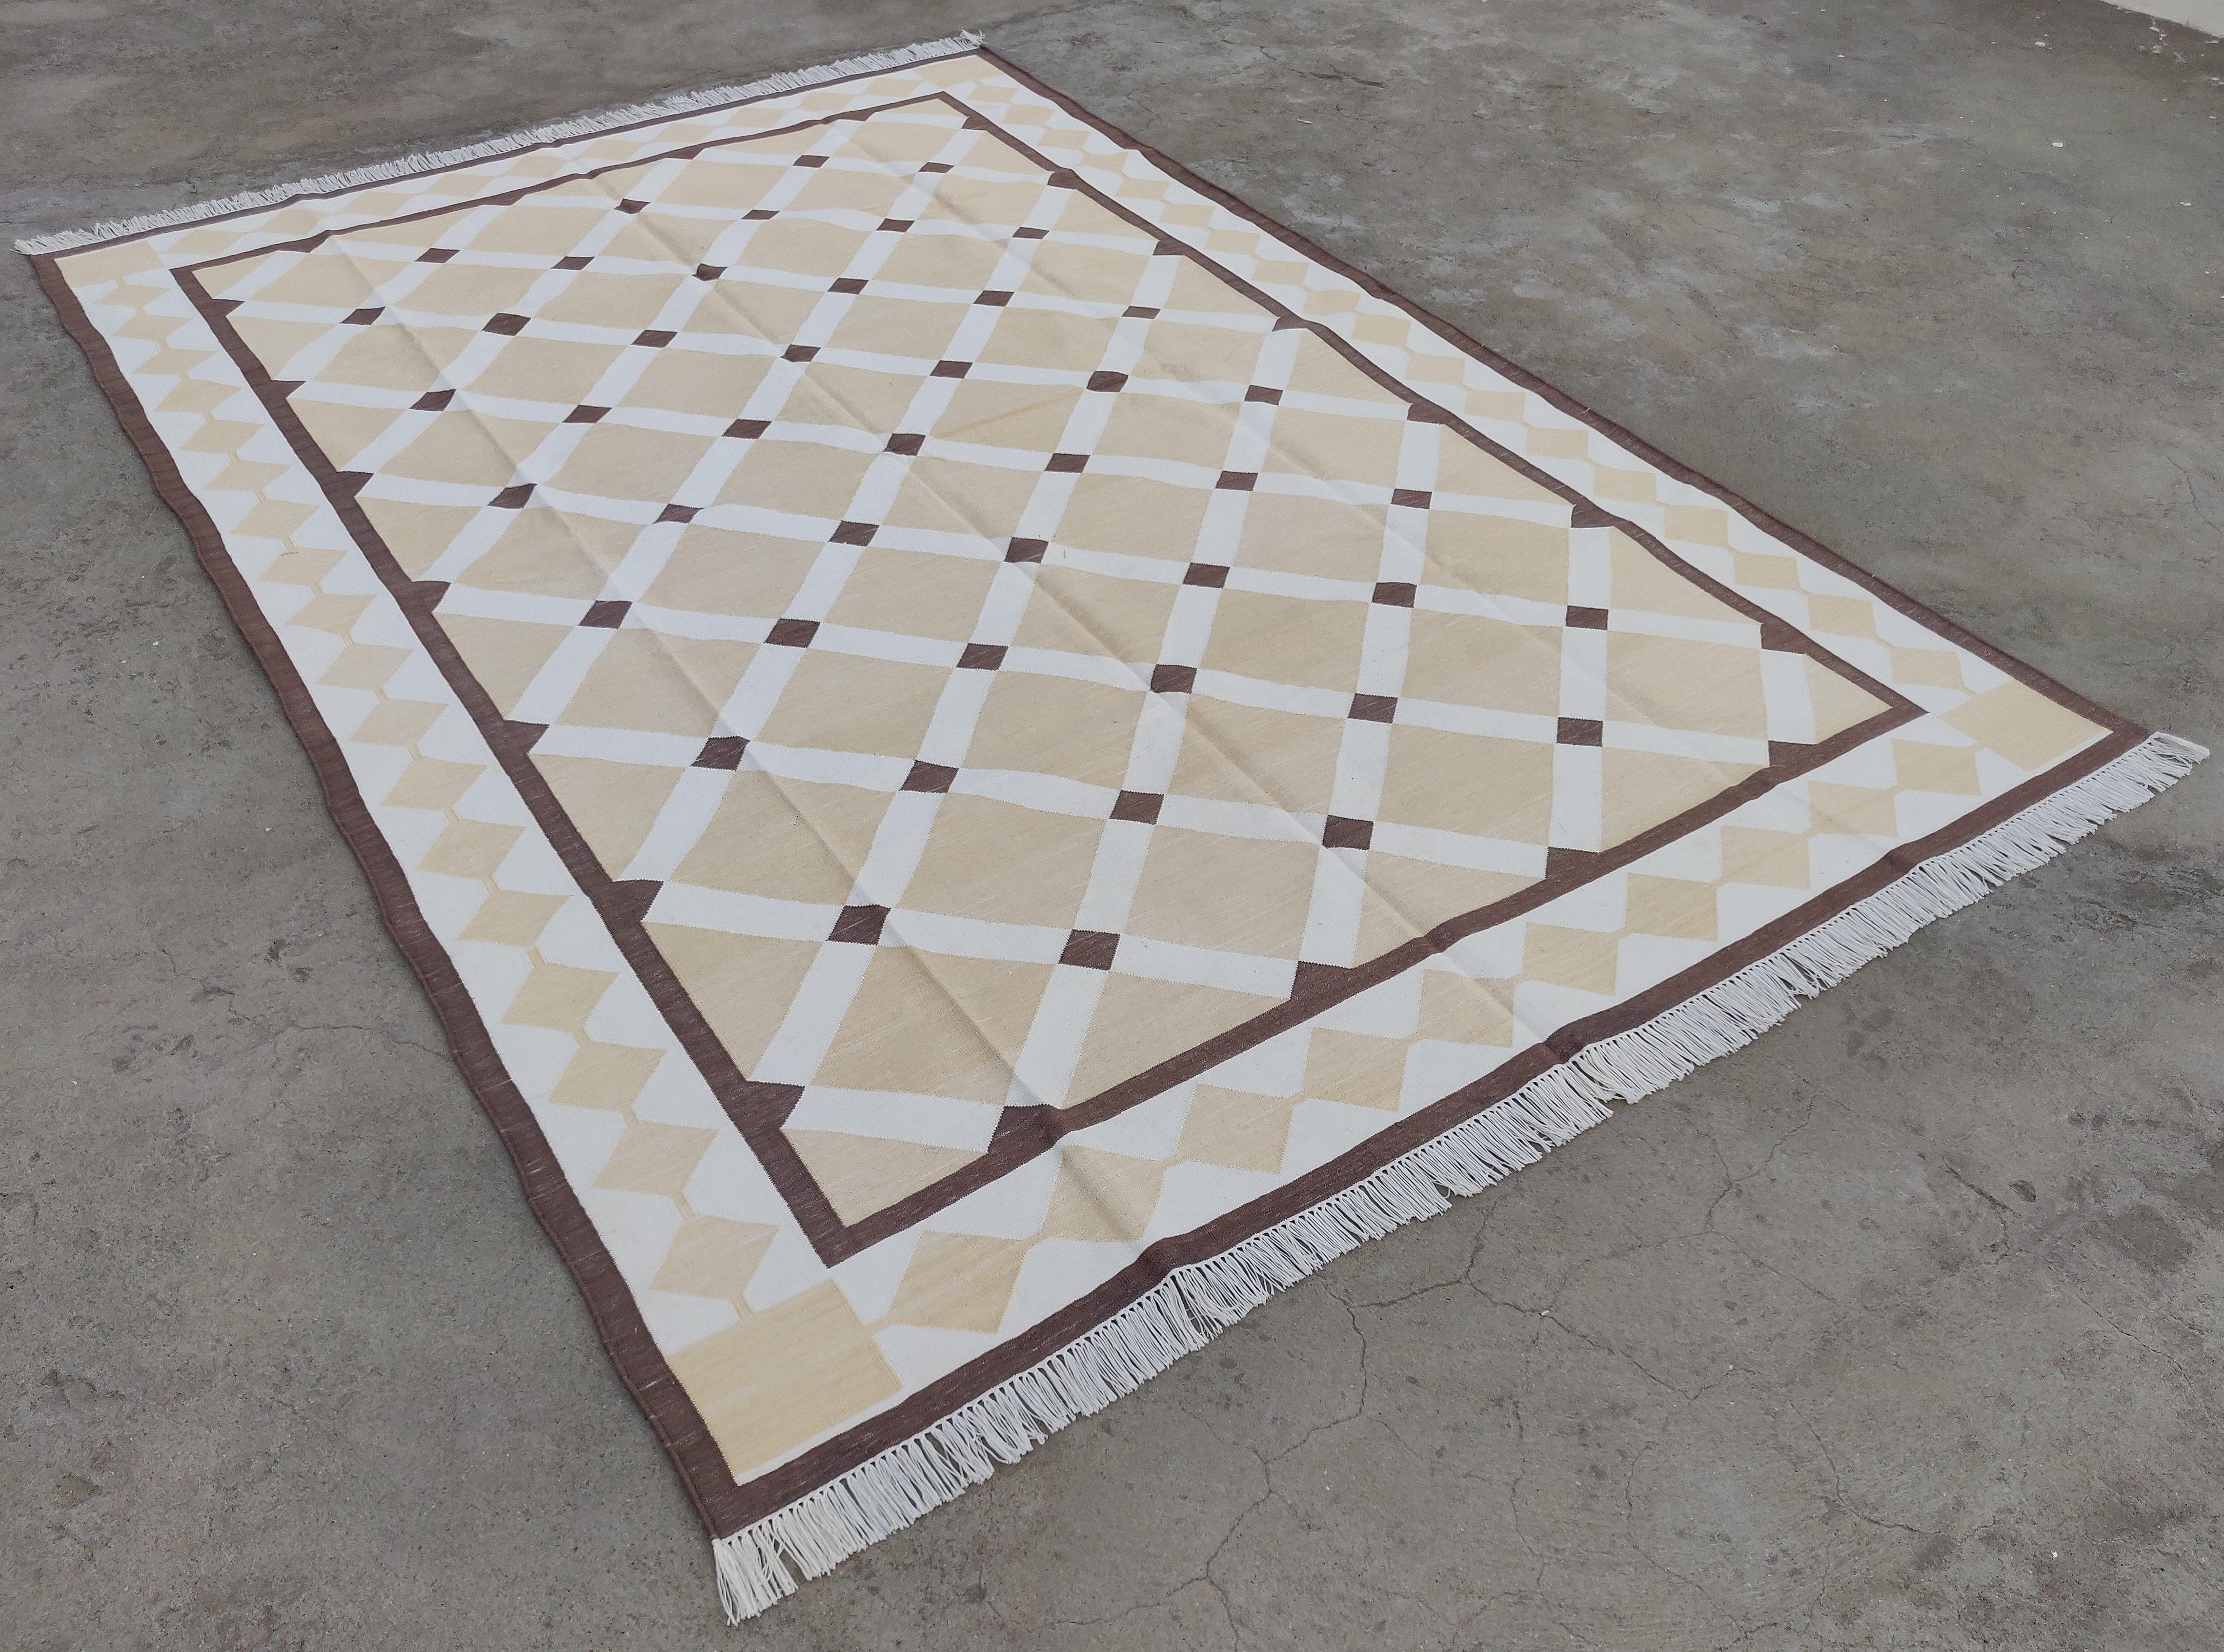 Cotton Vegetable Dyed Beige And Brown Geometric Indian Rug-6'x9' 
These special flat-weave dhurries are hand-woven with 15 ply 100% cotton yarn. Due to the special manufacturing techniques used to create our rugs, the size and color of each piece